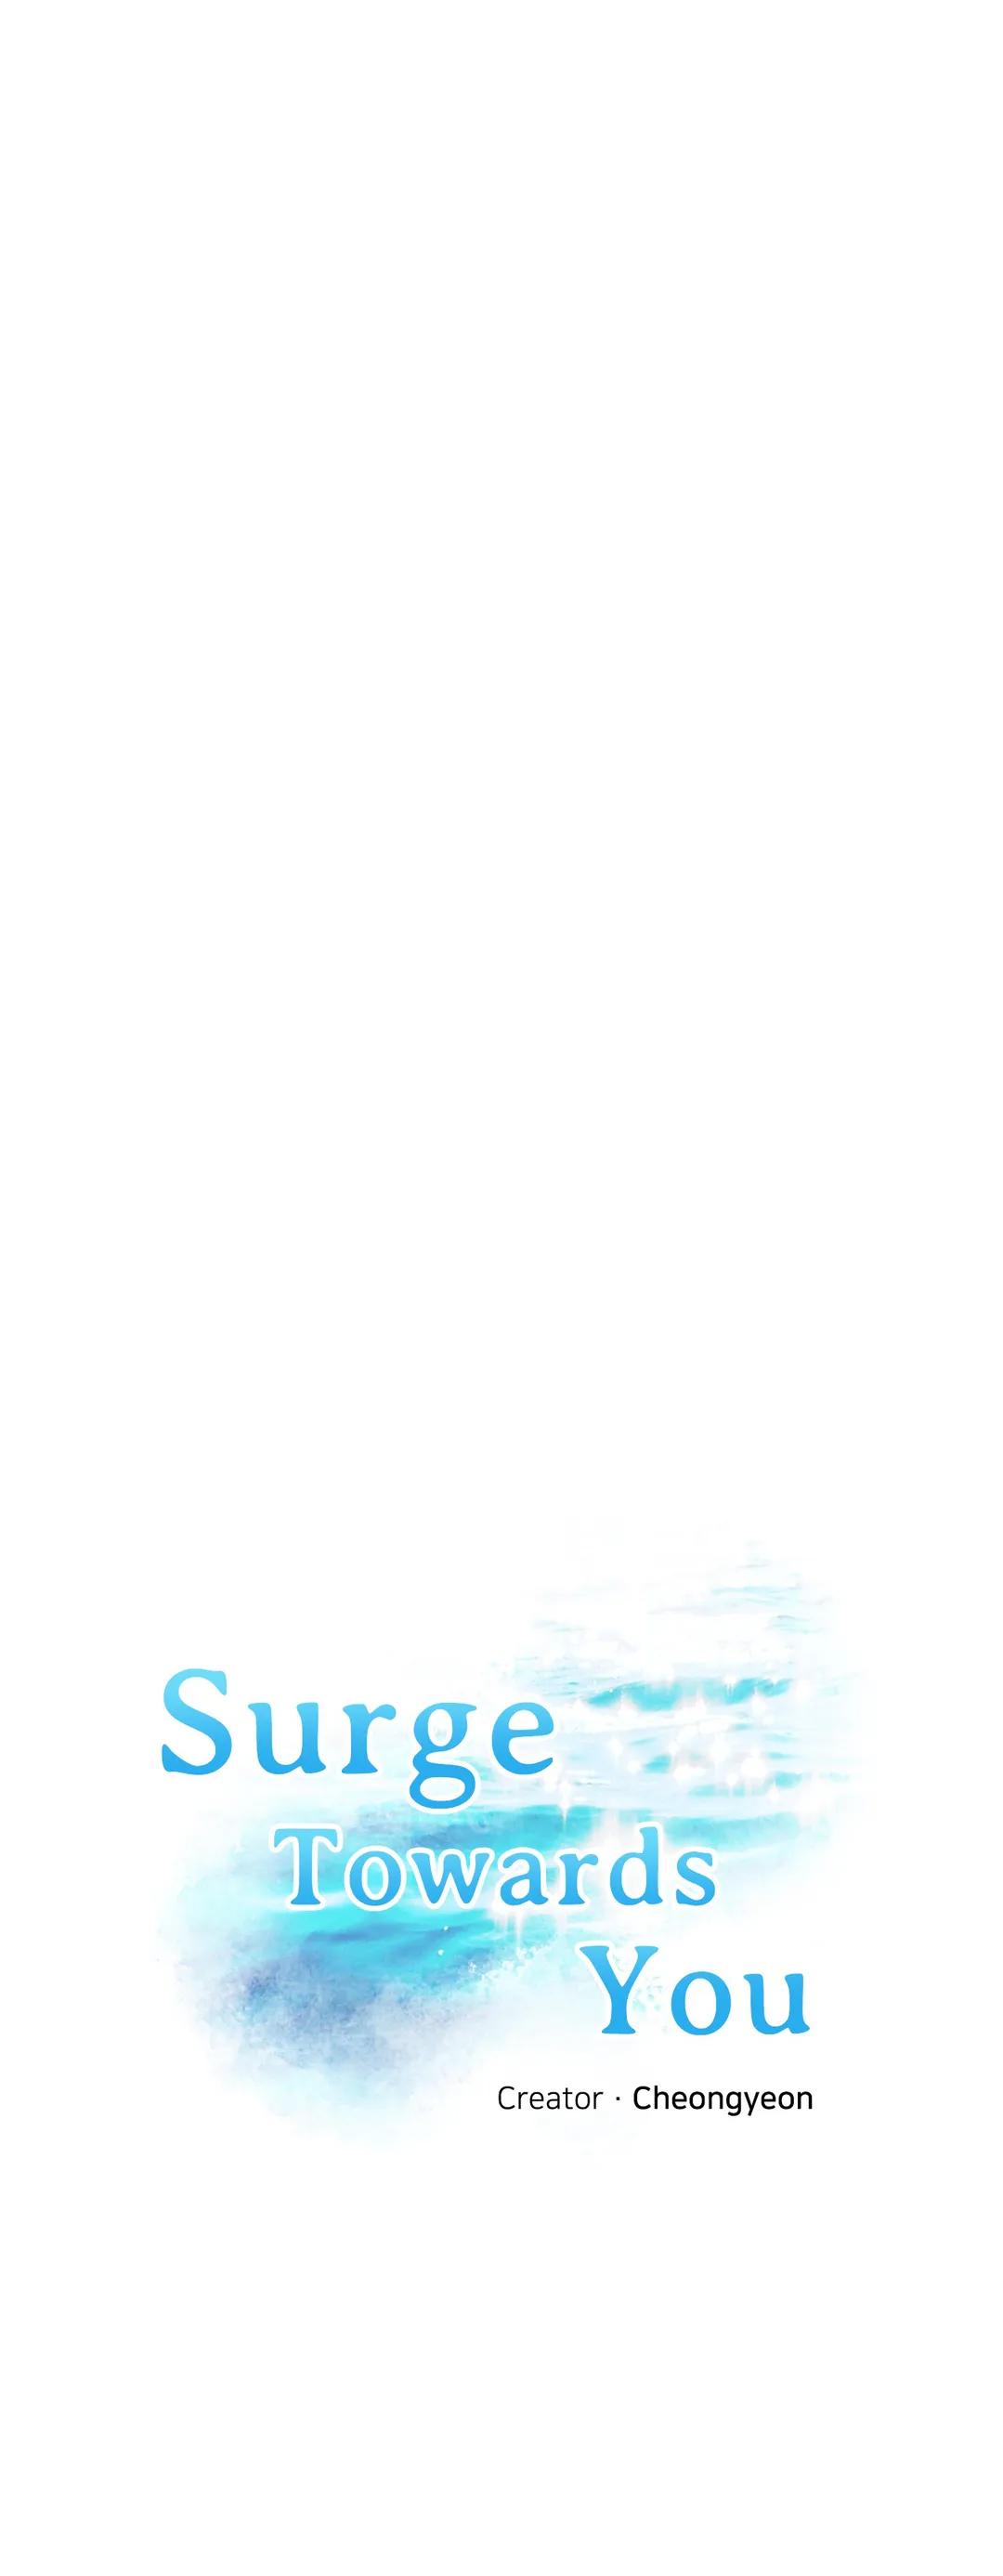 Surge Looking For You - Page 2